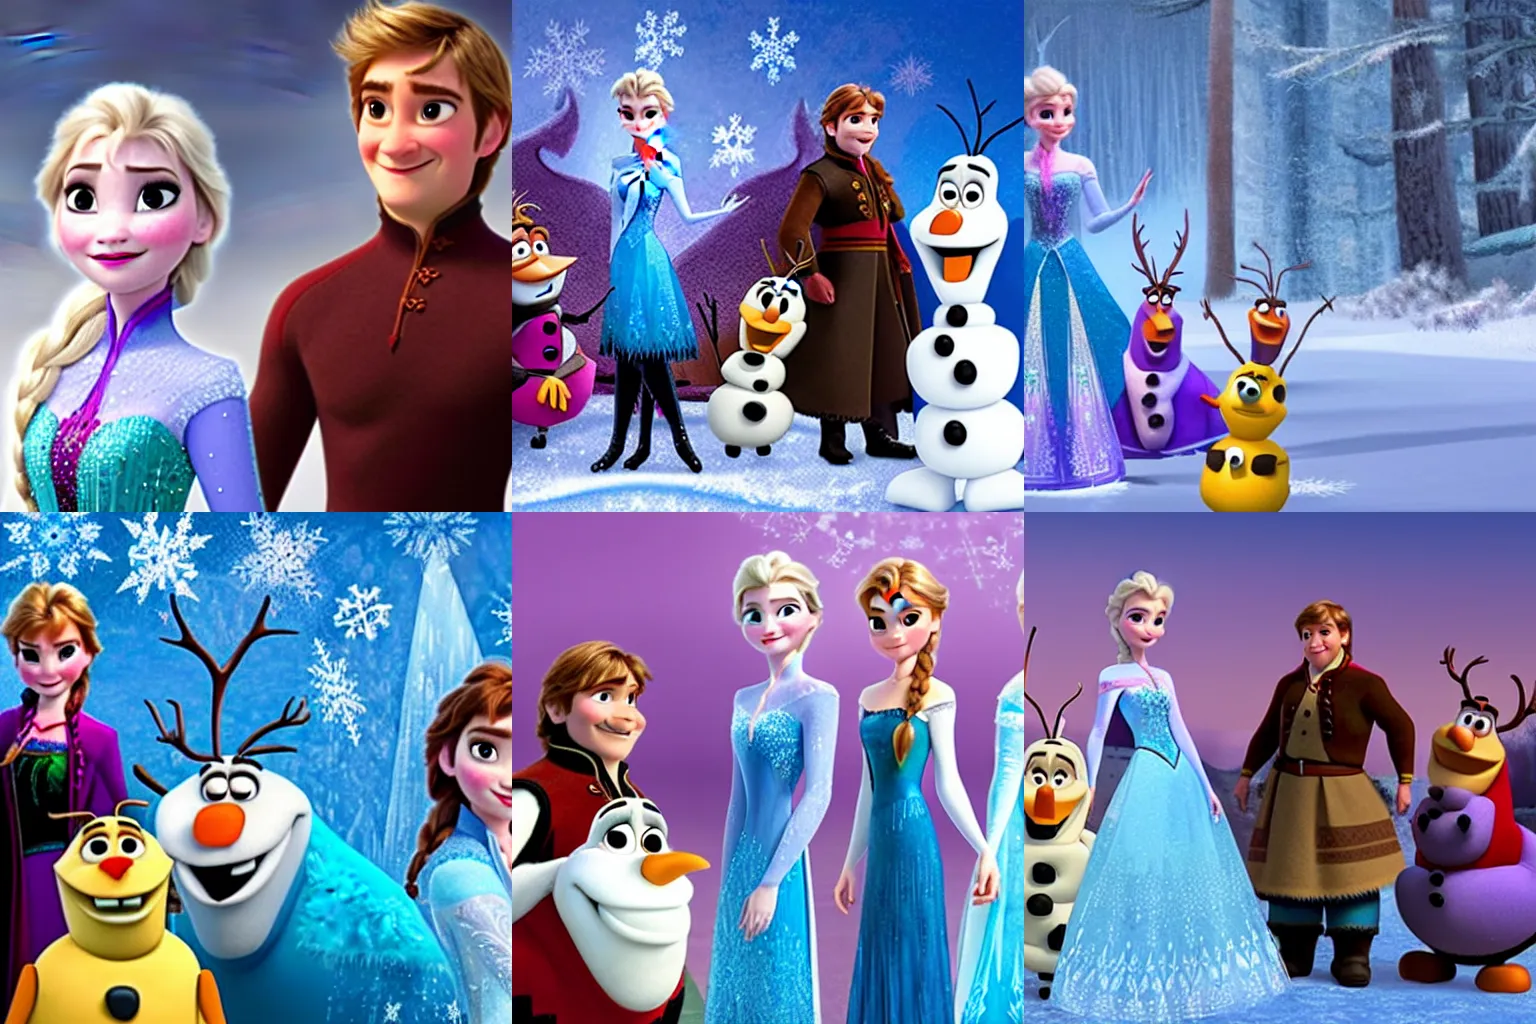 Prompt: A still from Disney's Frozen where all characters are redesigned to look a lot like Danny Devito